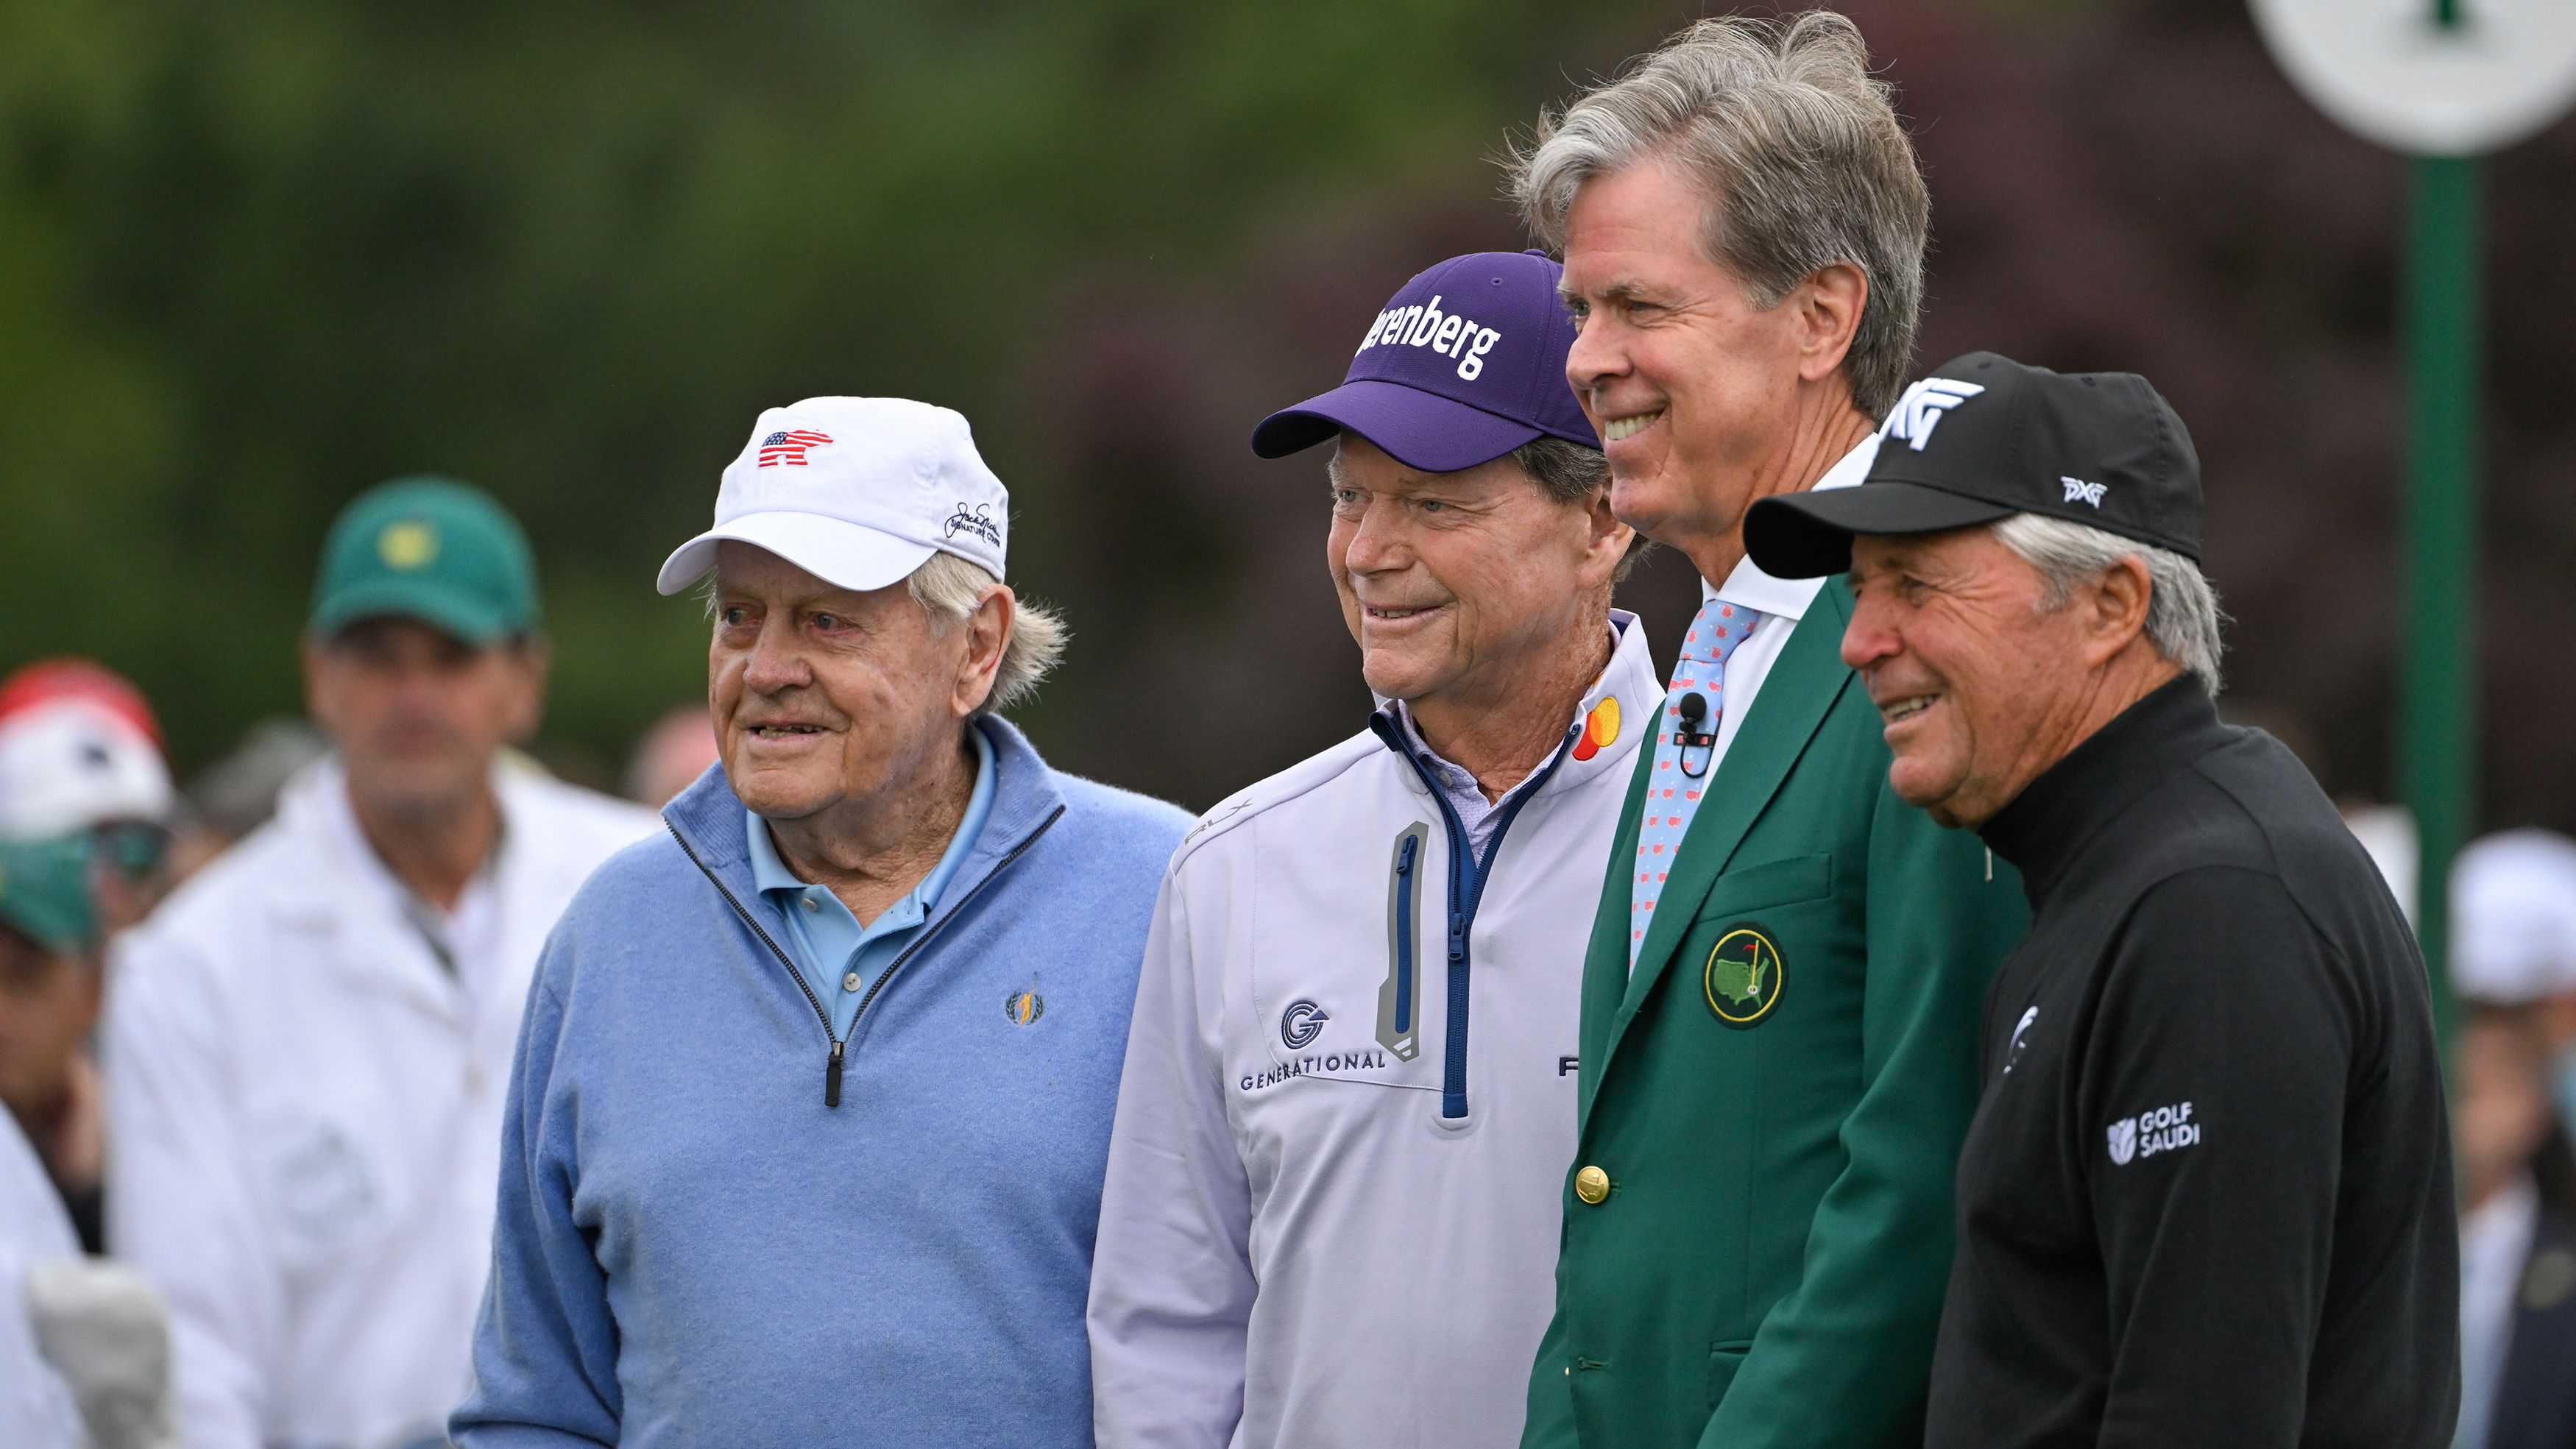 'Ain't it good to be together again?': Why the 'room grew quiet' during Masters dinner